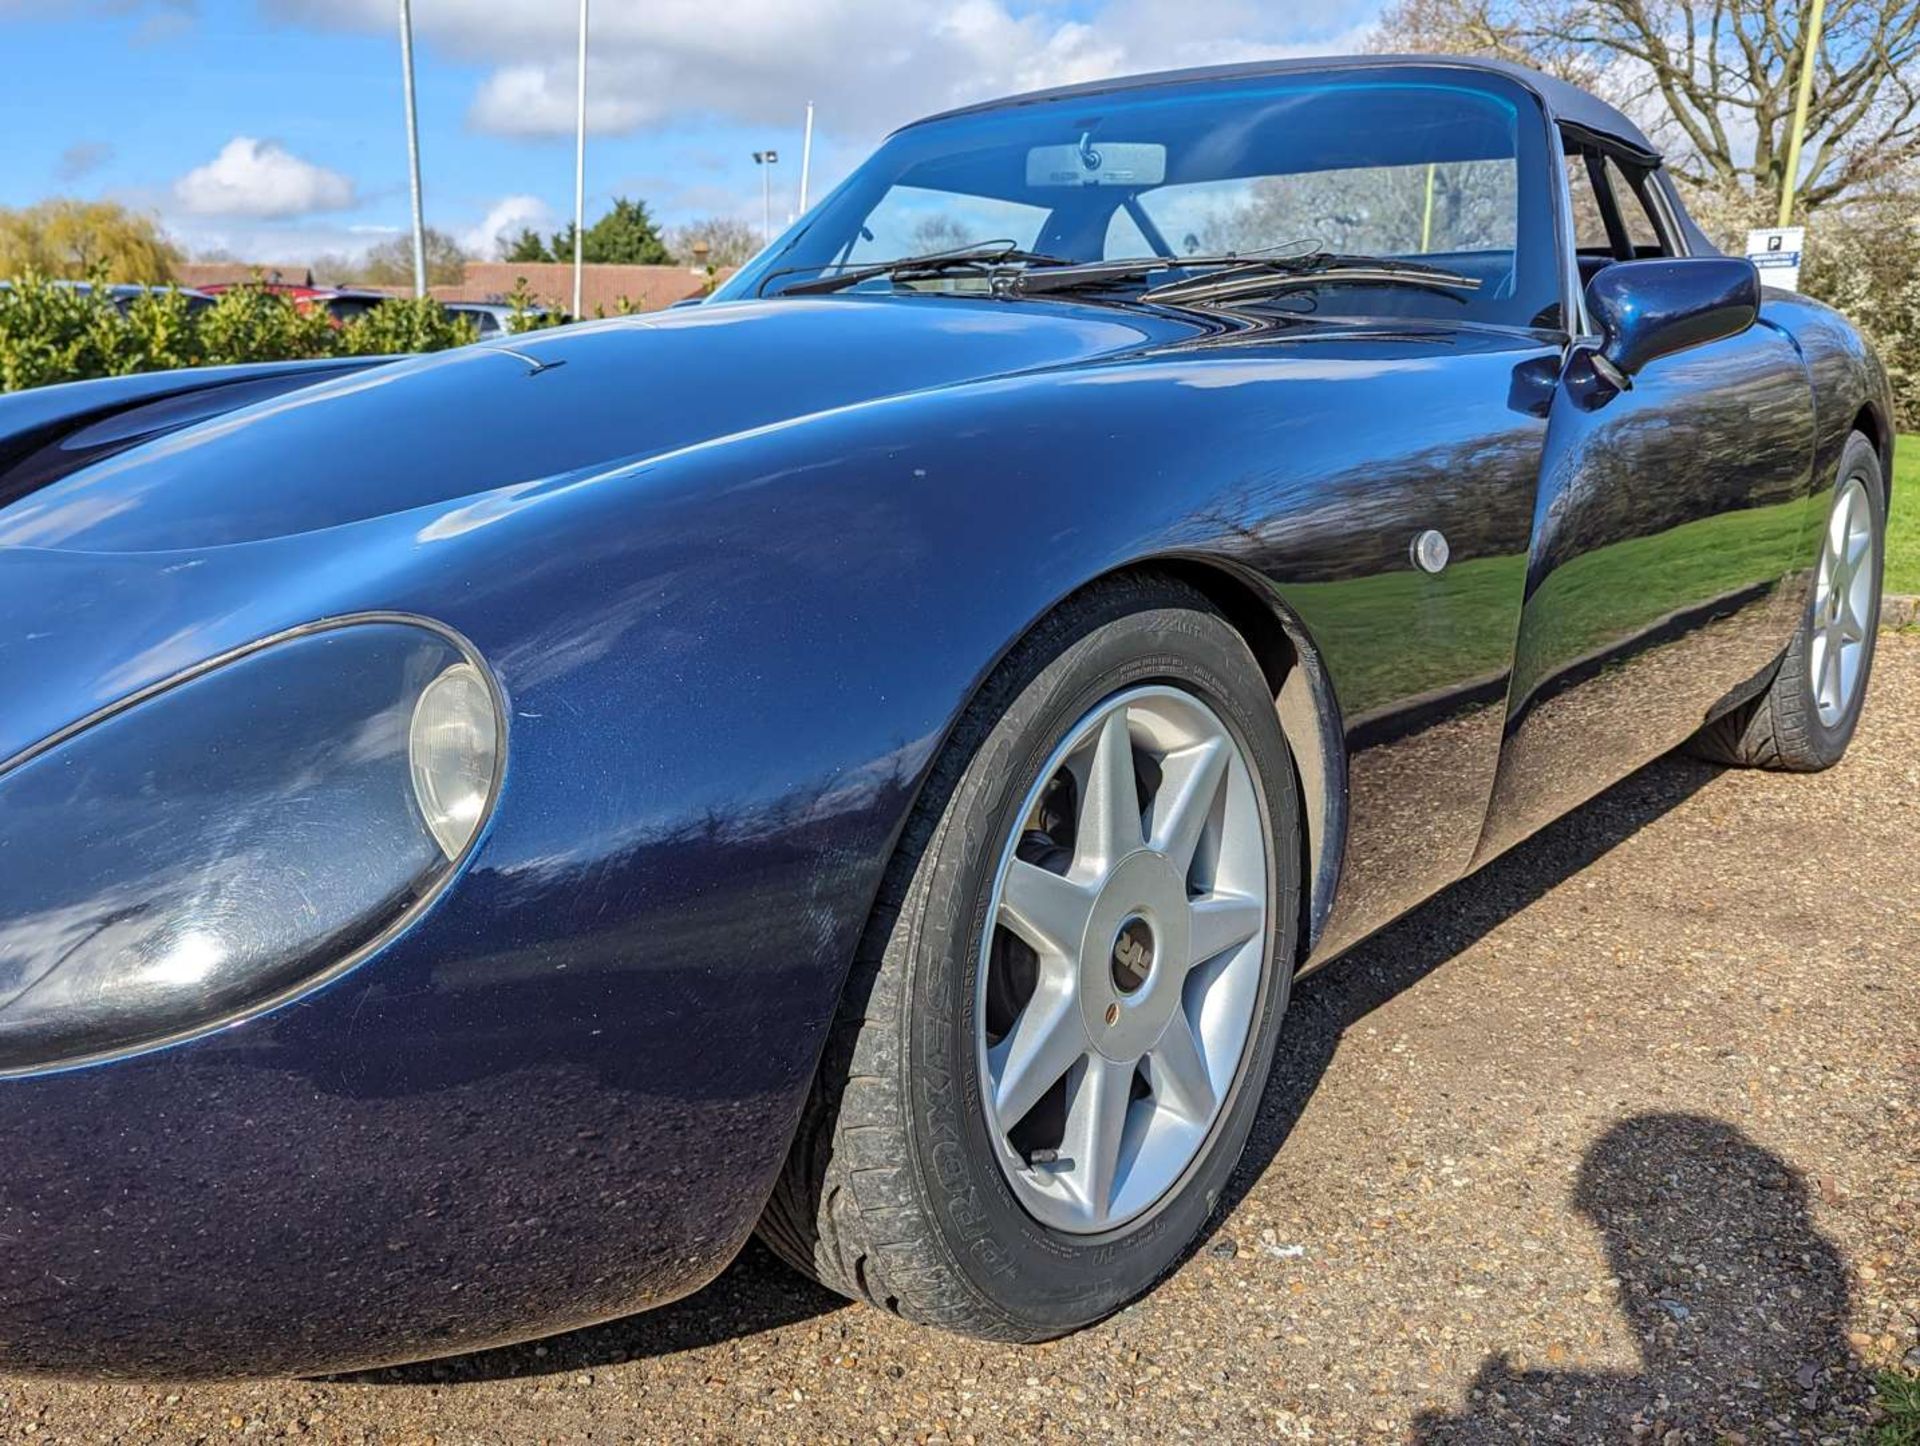 1997 TVR GRIFFITH 5.0 - Image 10 of 29